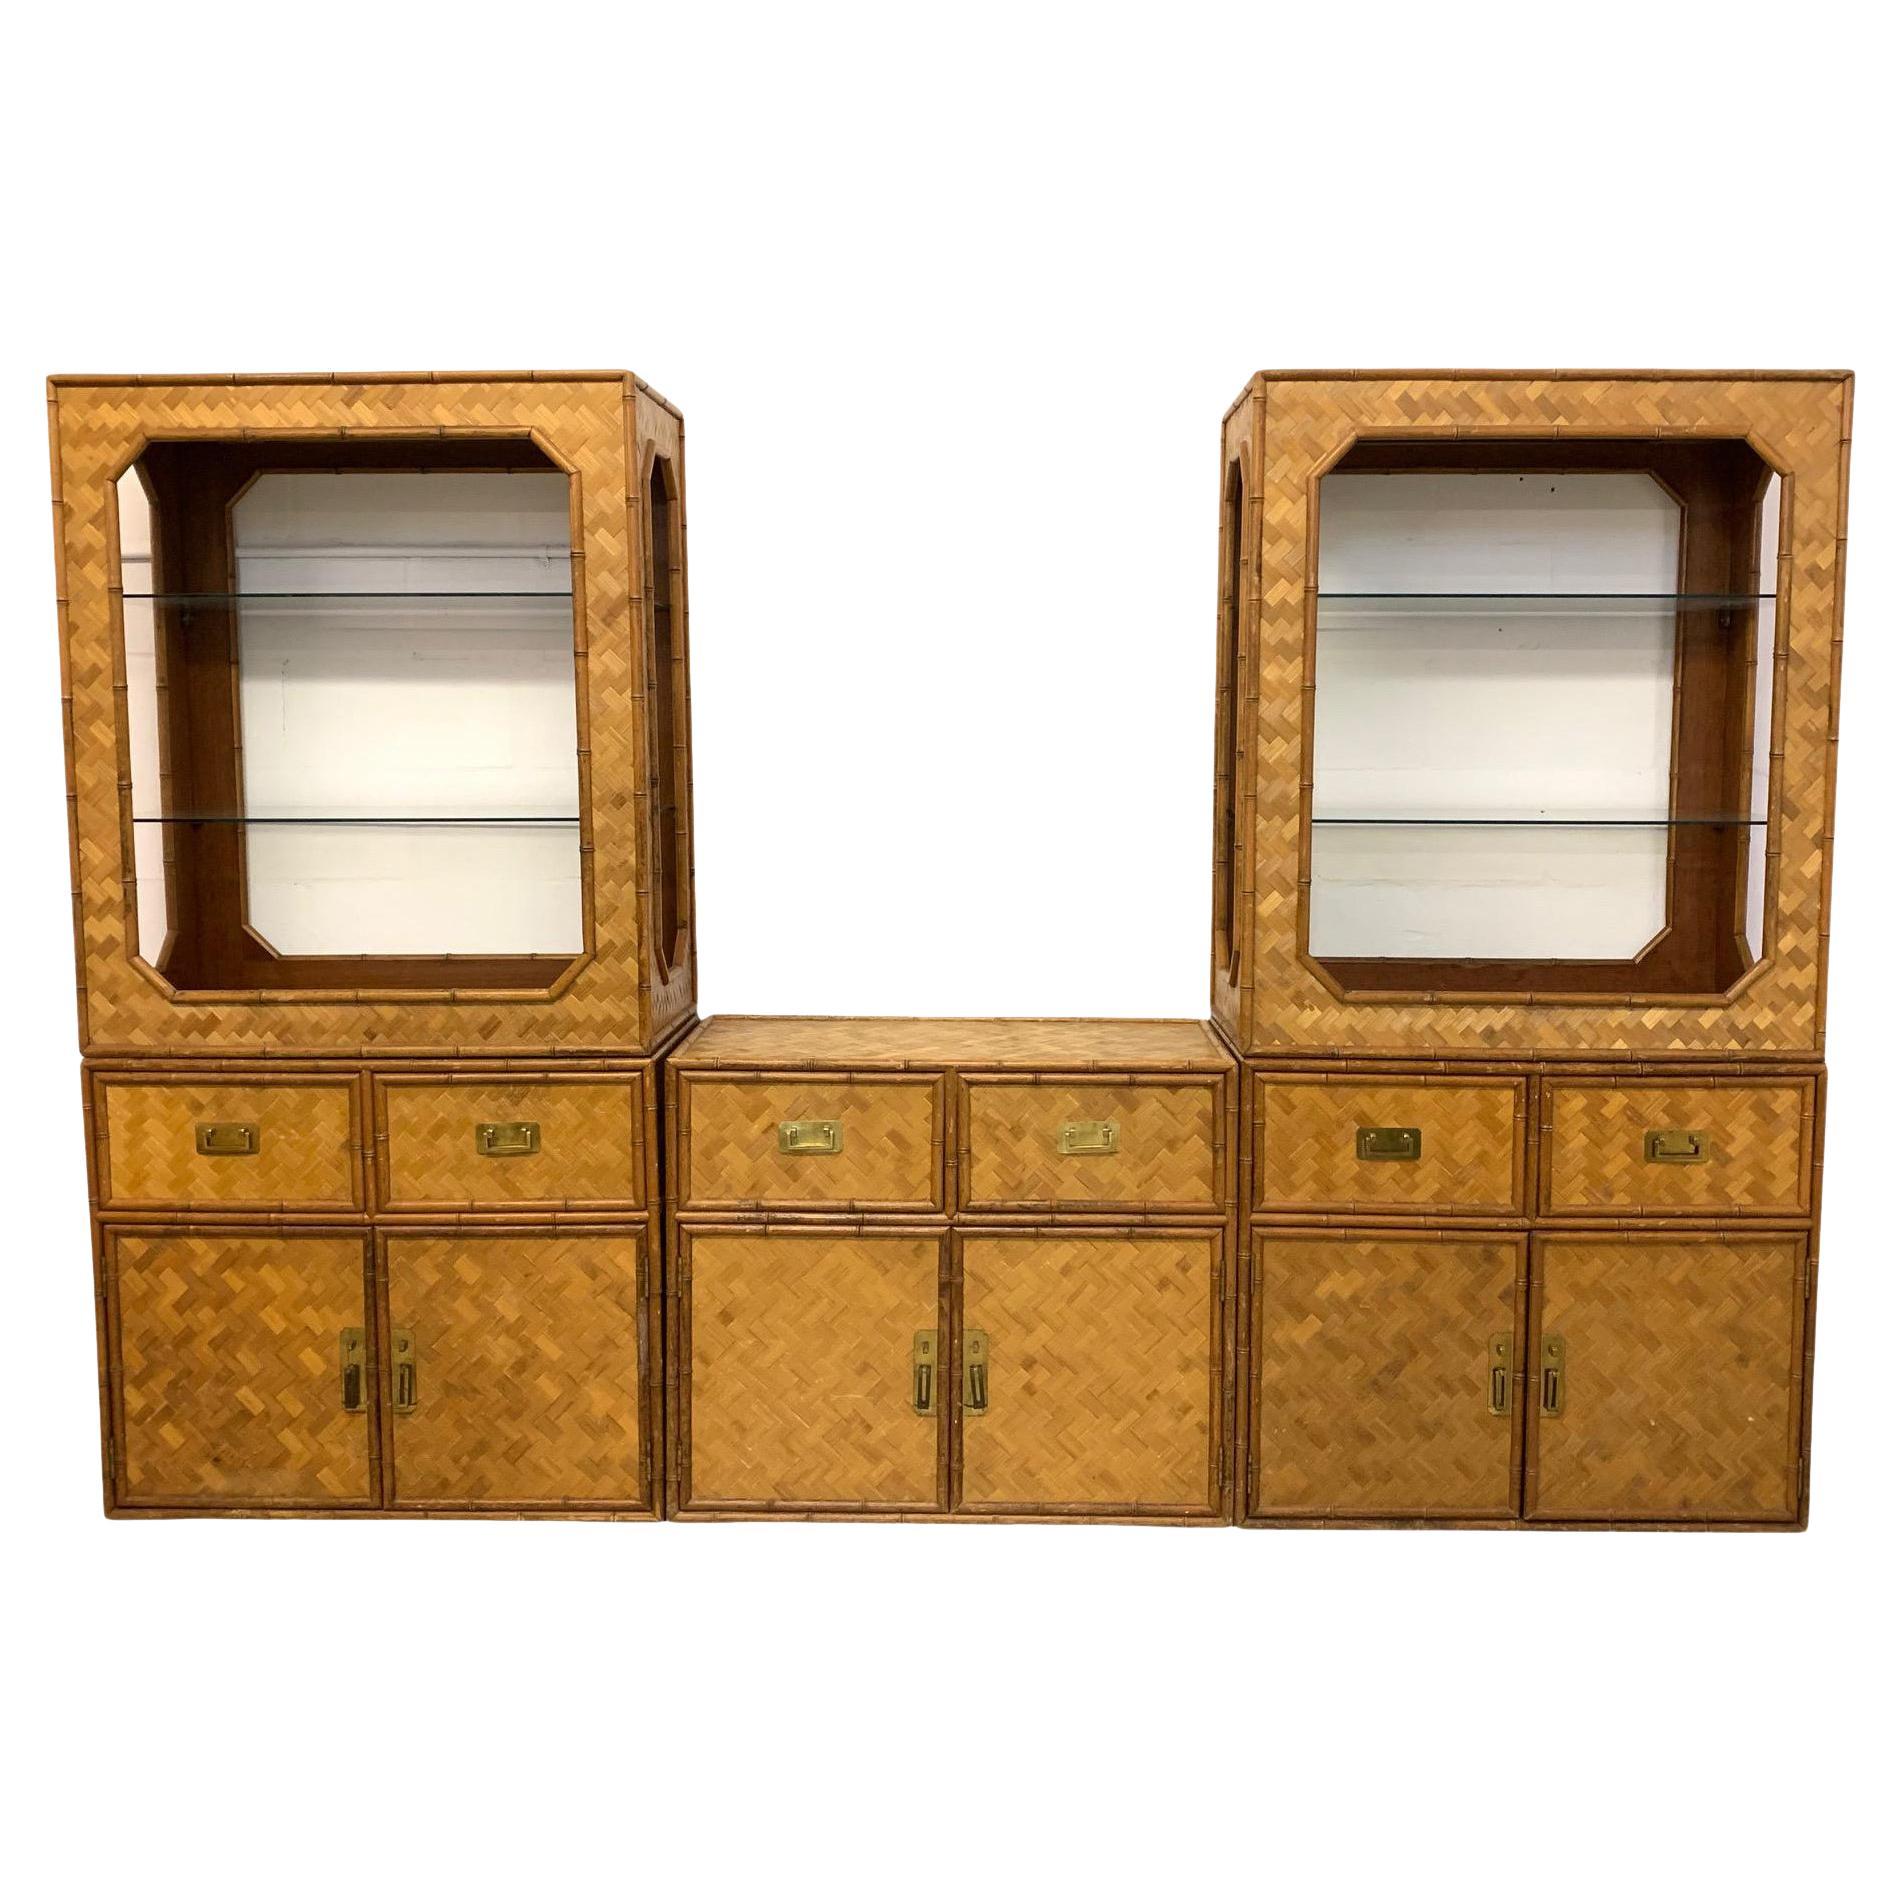 Wicker Faux Bamboo and Basketweave Cane 3-Piece Wall Unit